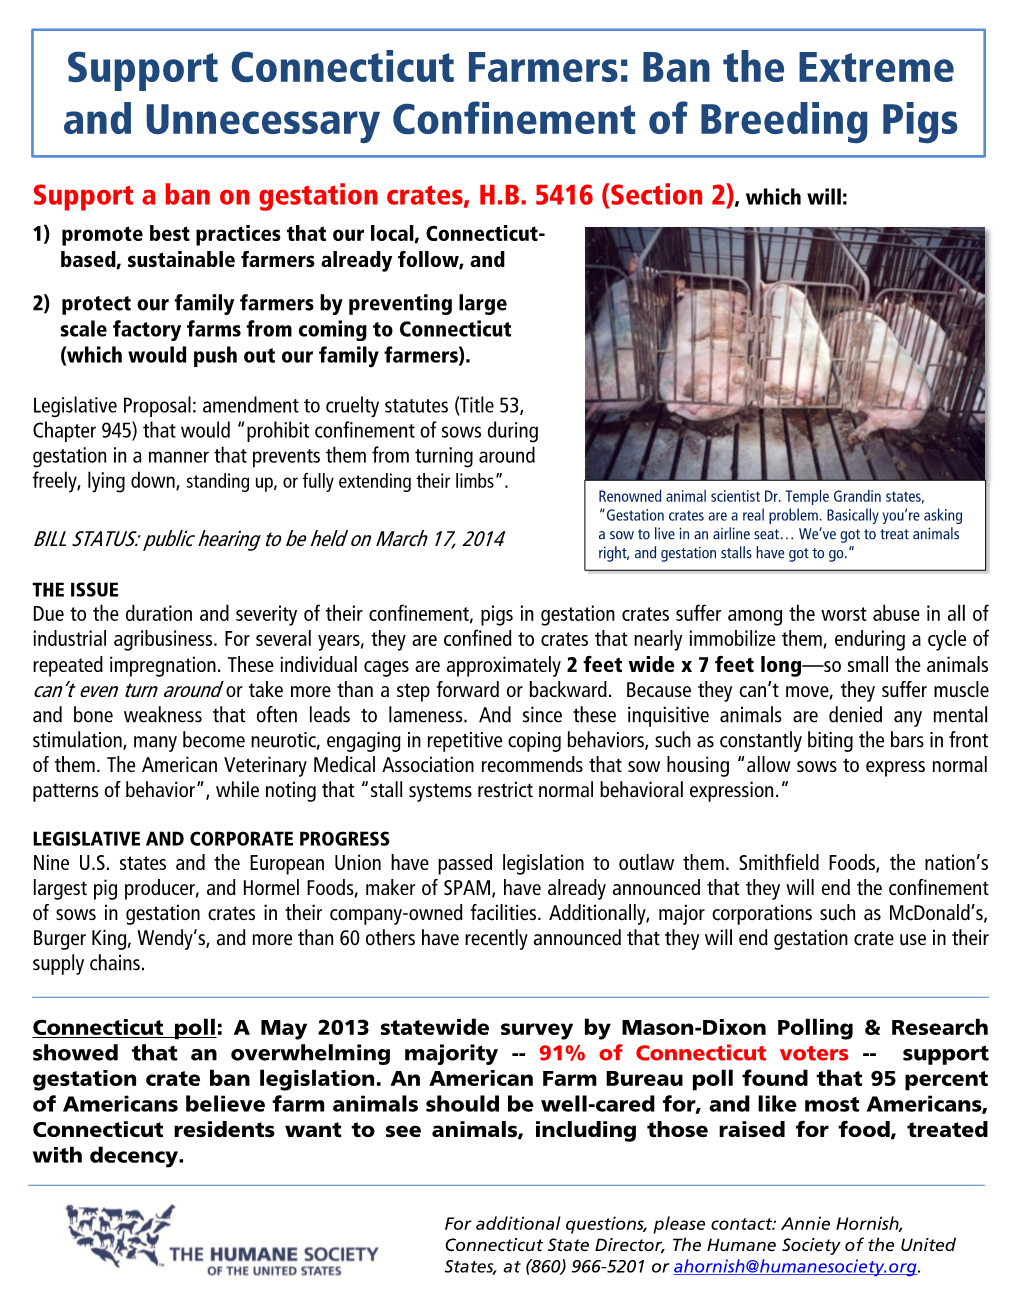 Support Connecticut Farmers: Ban the Extreme and Unnecessary Confinement of Breeding Pigs